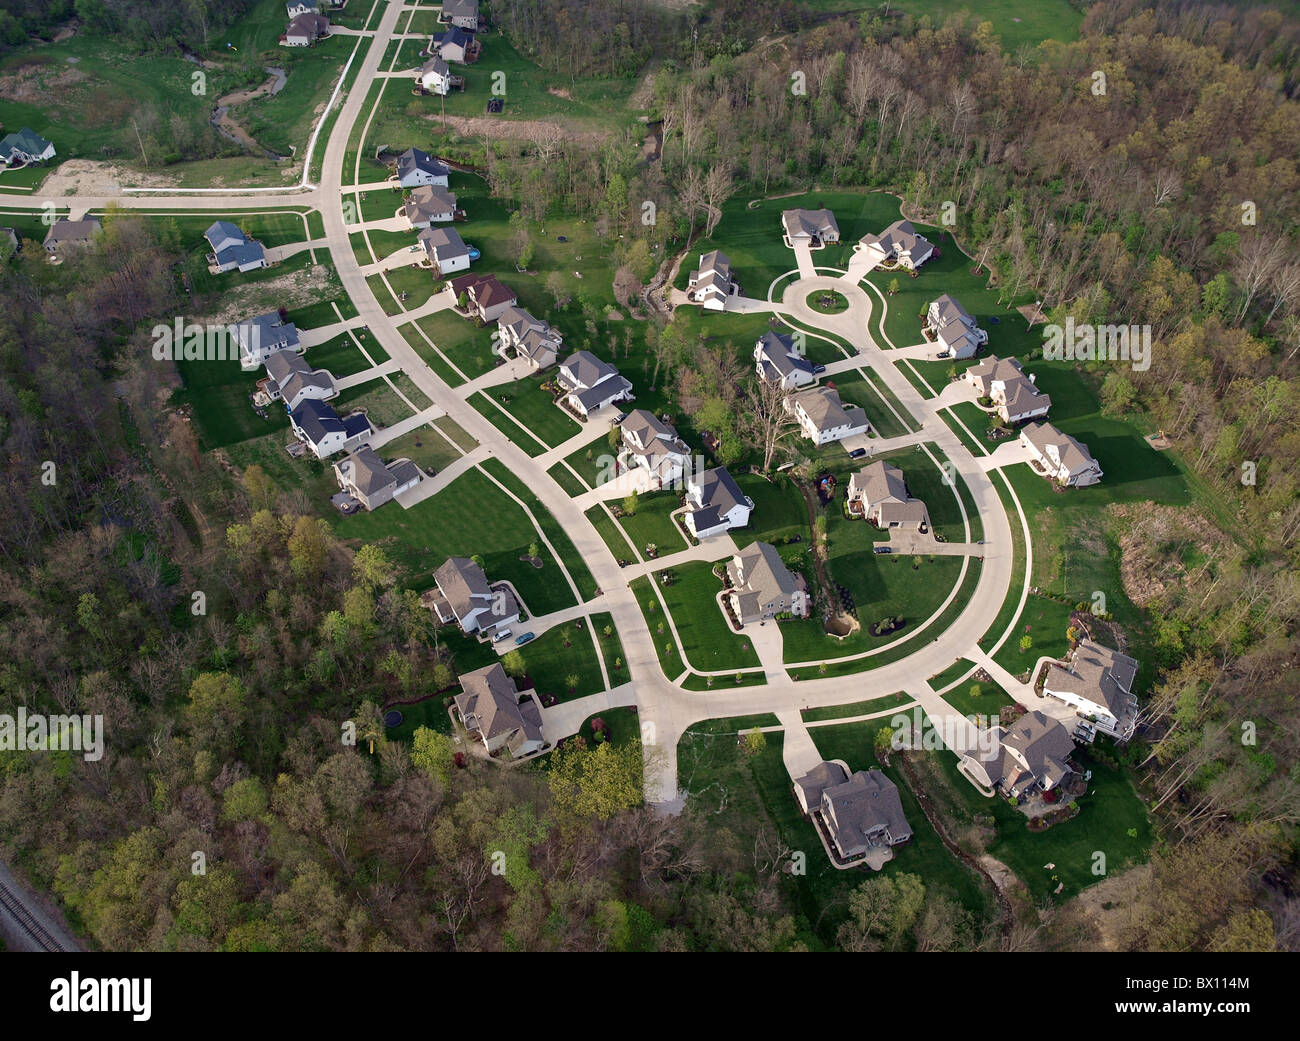 Brand new suburb freshly cut out of a eastern US forest. Stock Photo